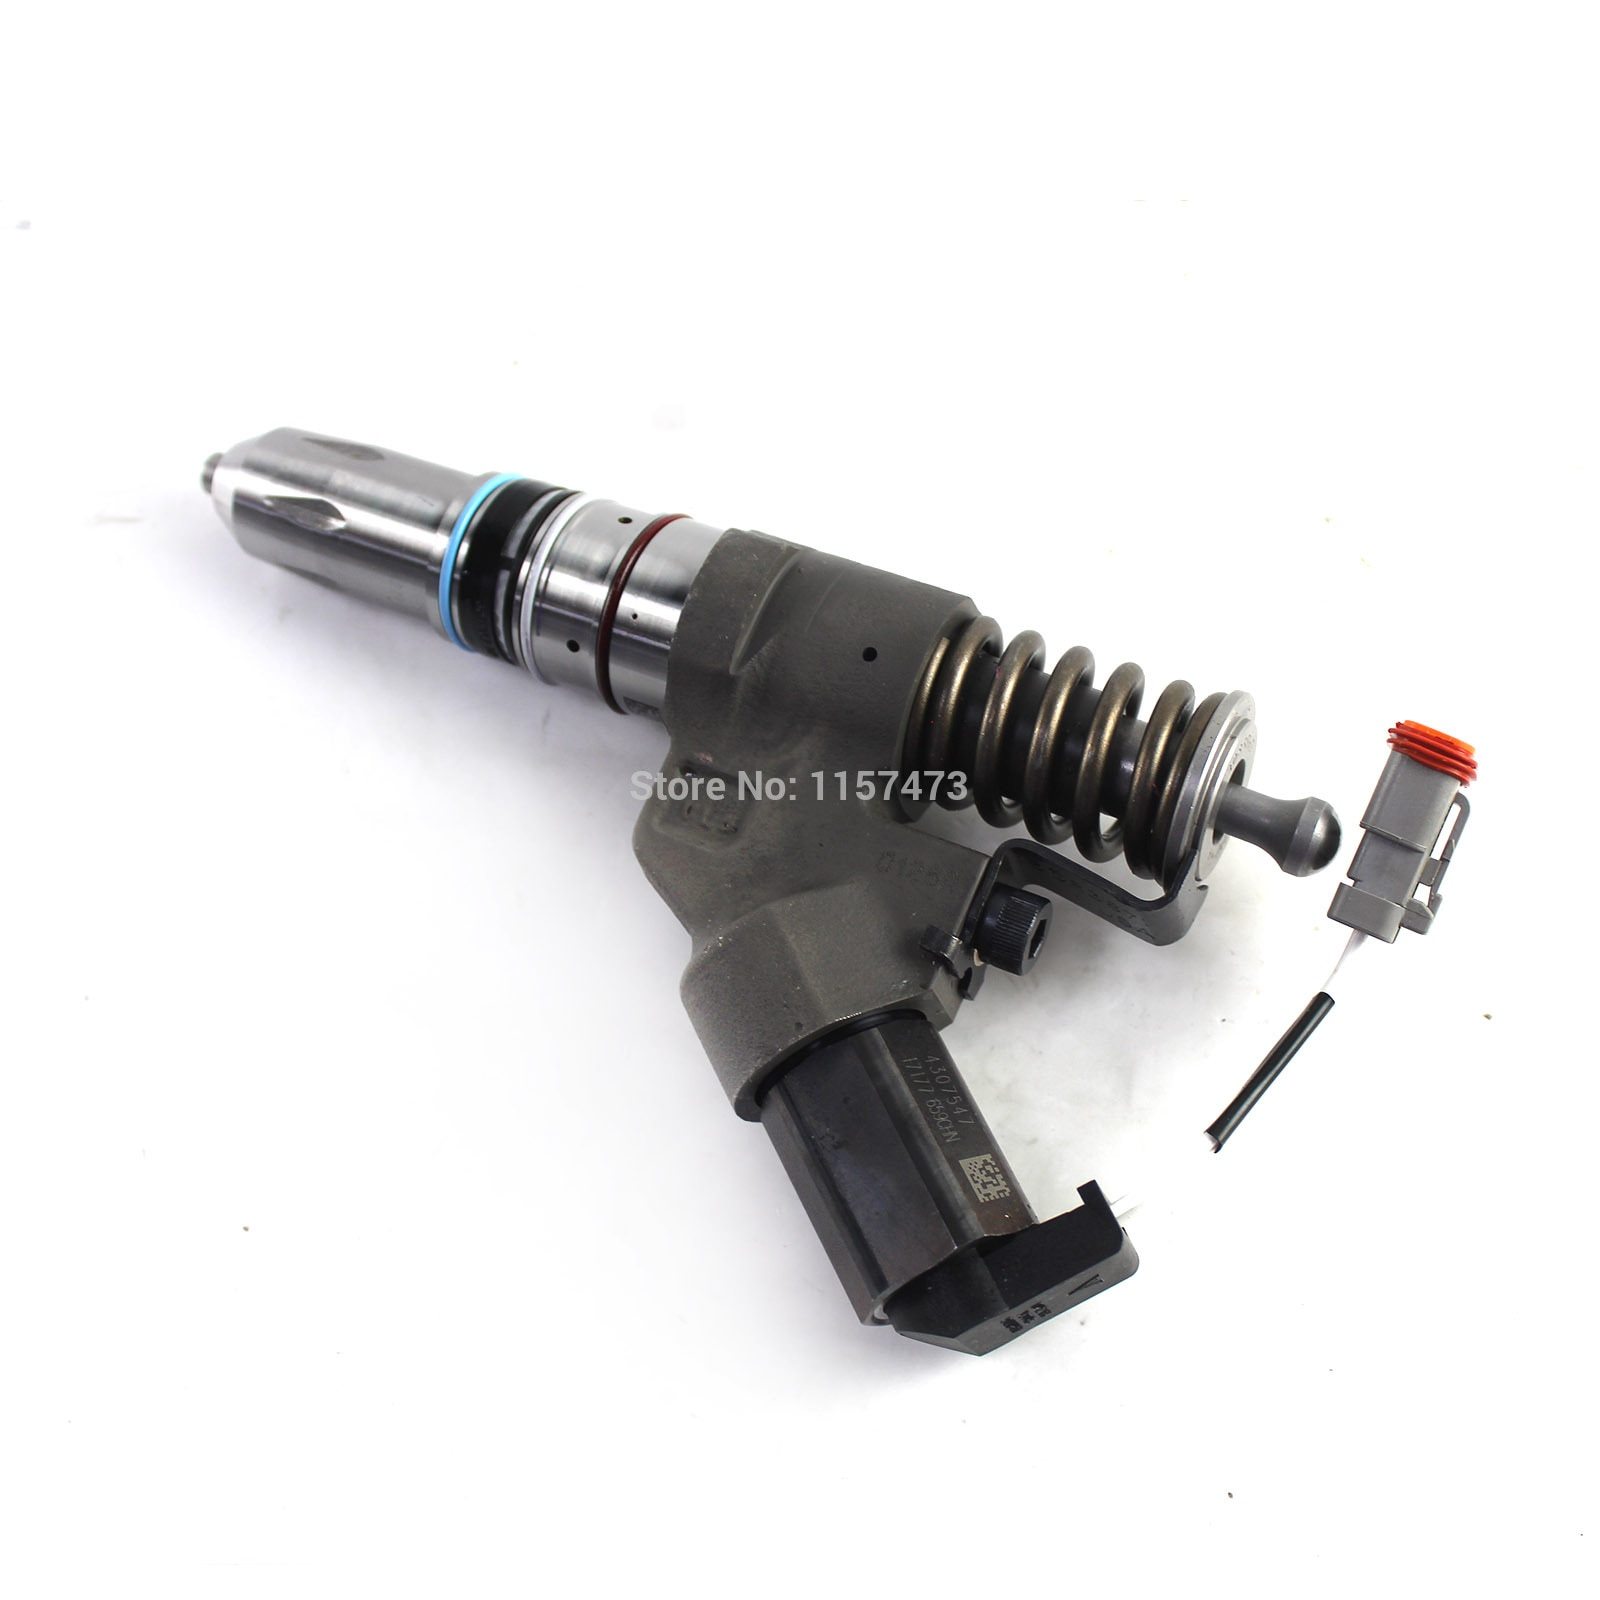 Diesel Fuel Injector Nozzle 4026222 For M11 Engine Parts with 3 month warranty